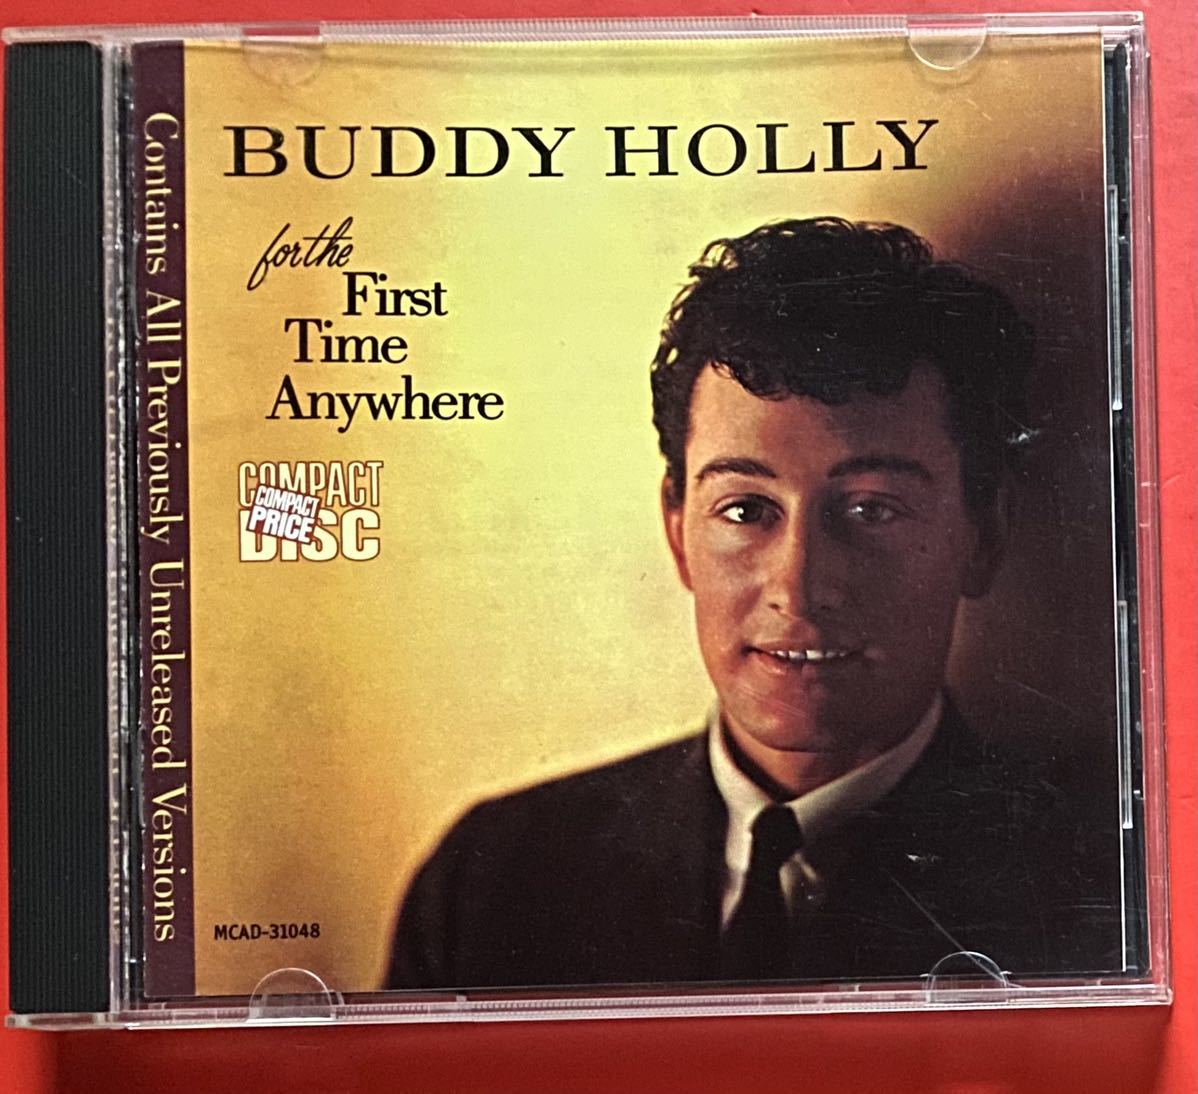 【CD】BUDDY HOLLY「FOR THE FIRST TIME ANYWHERE」バディ・ホリー 輸入盤 [09100290]_画像1